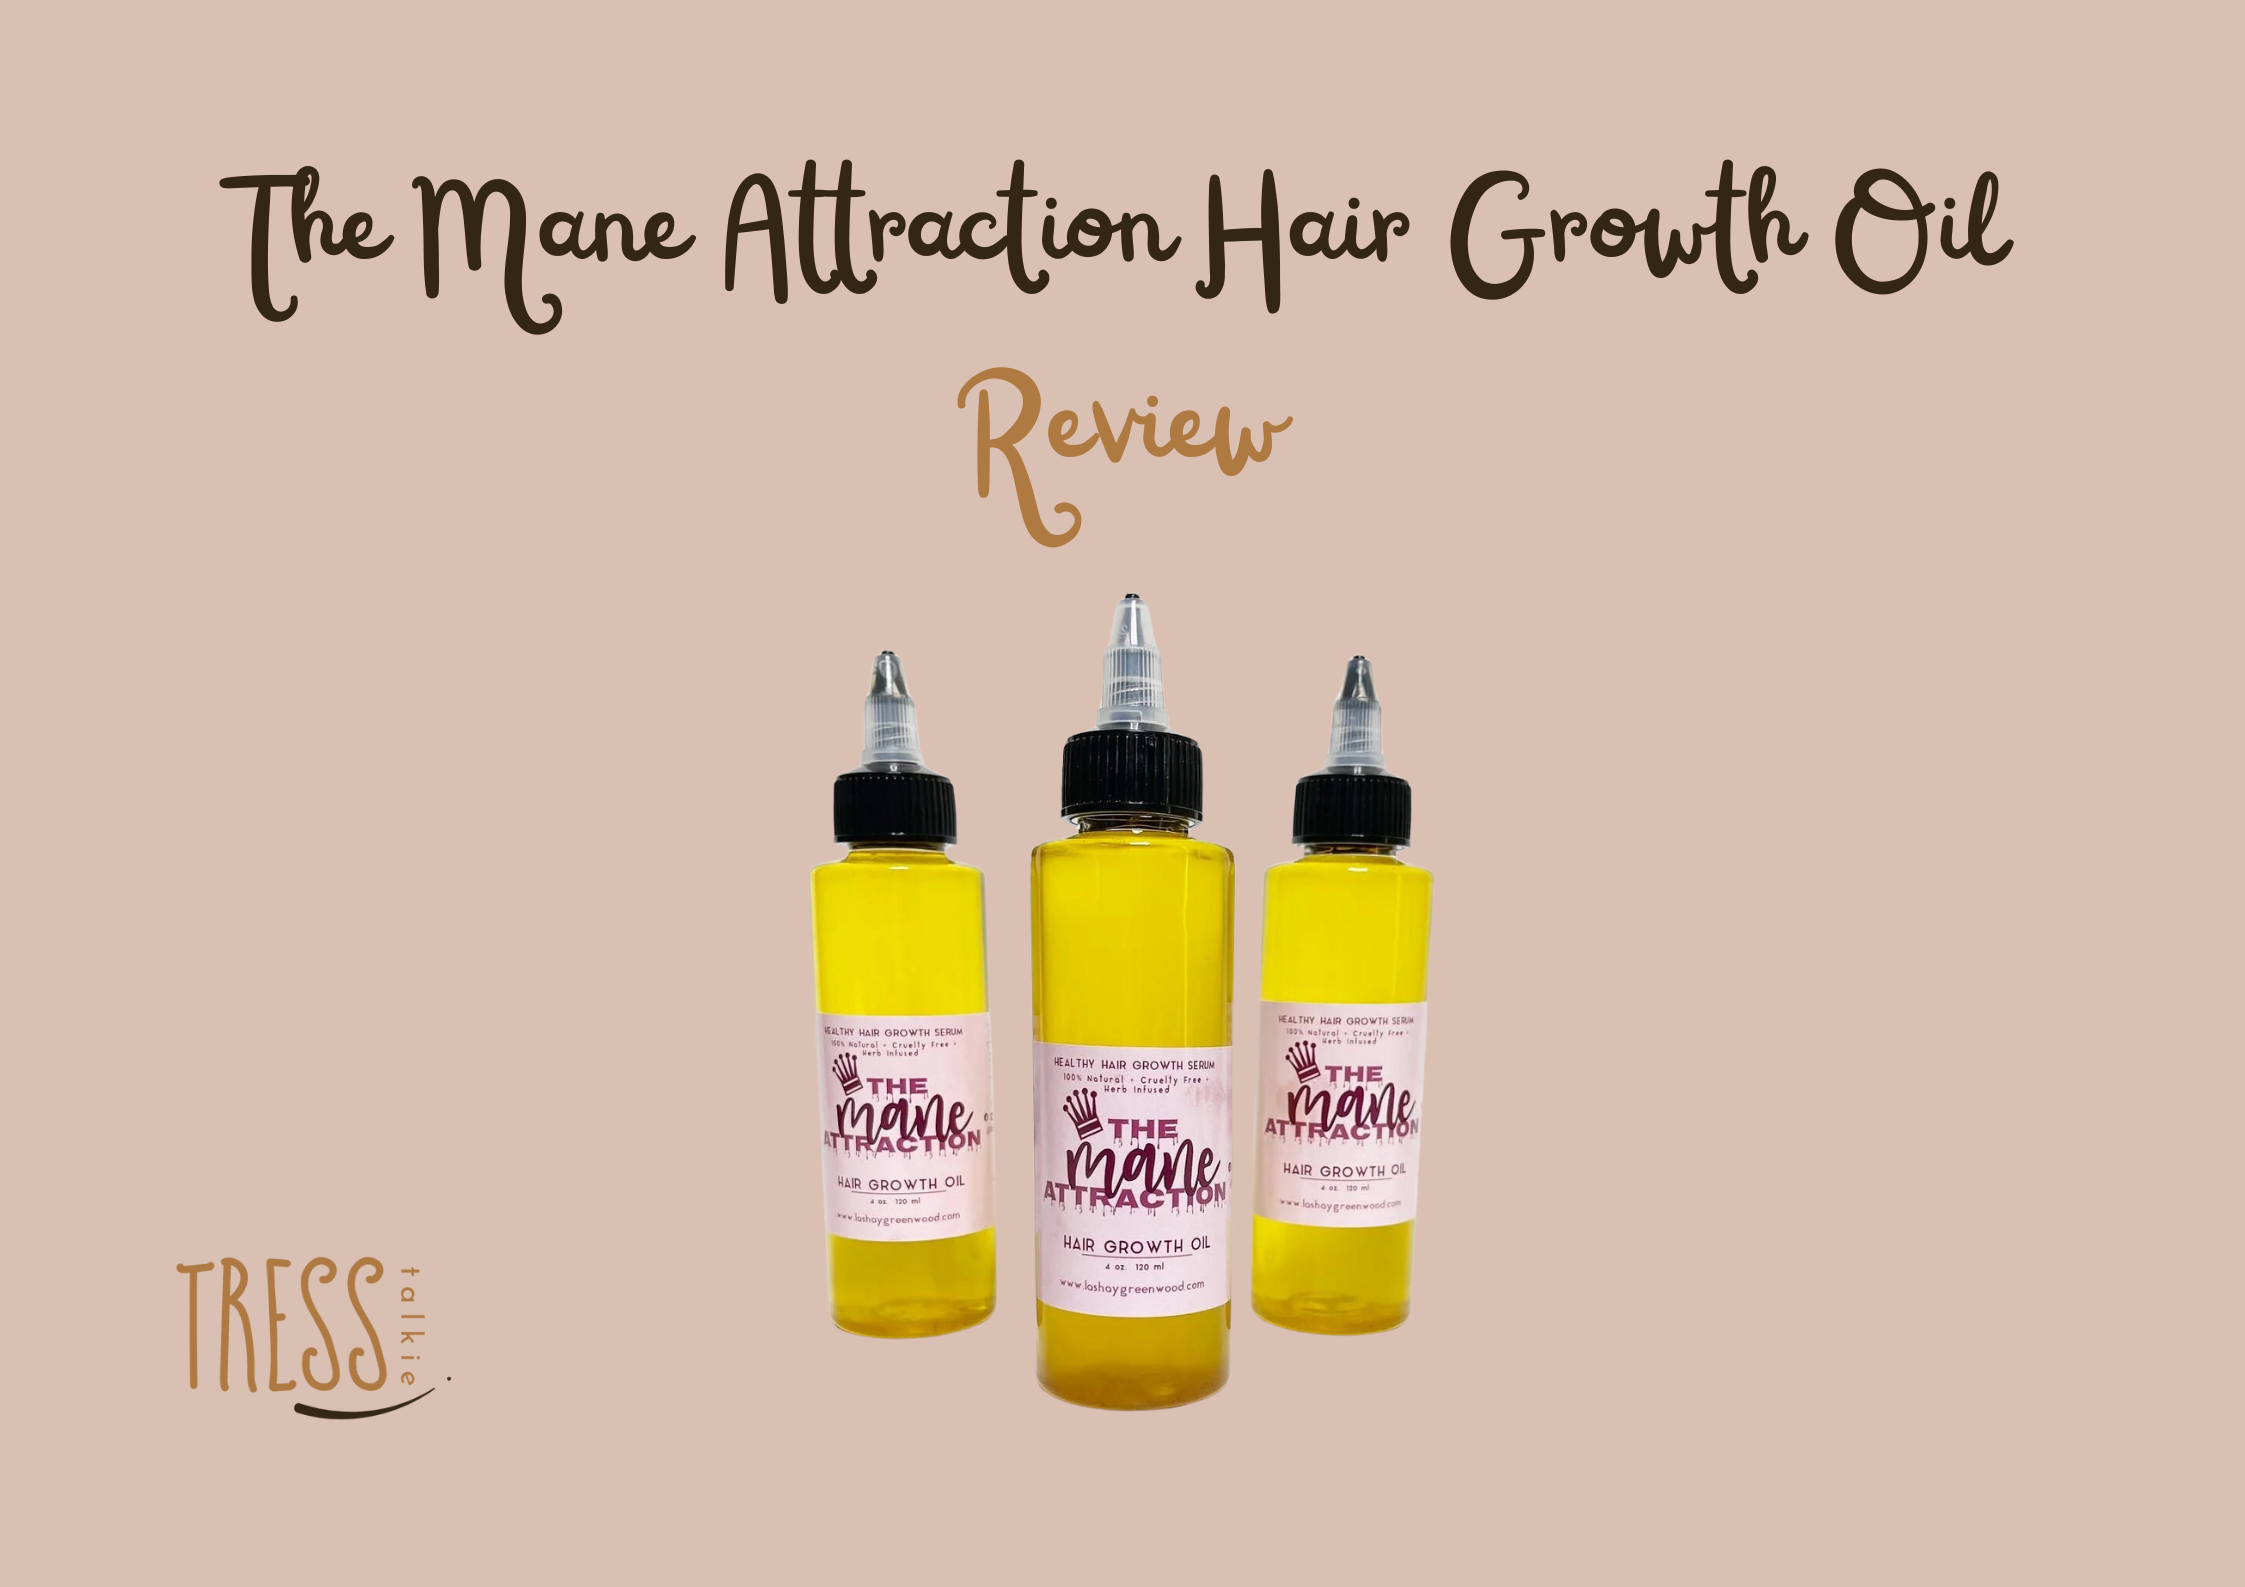 The Mane Attraction Hair Growth Oil Reviews